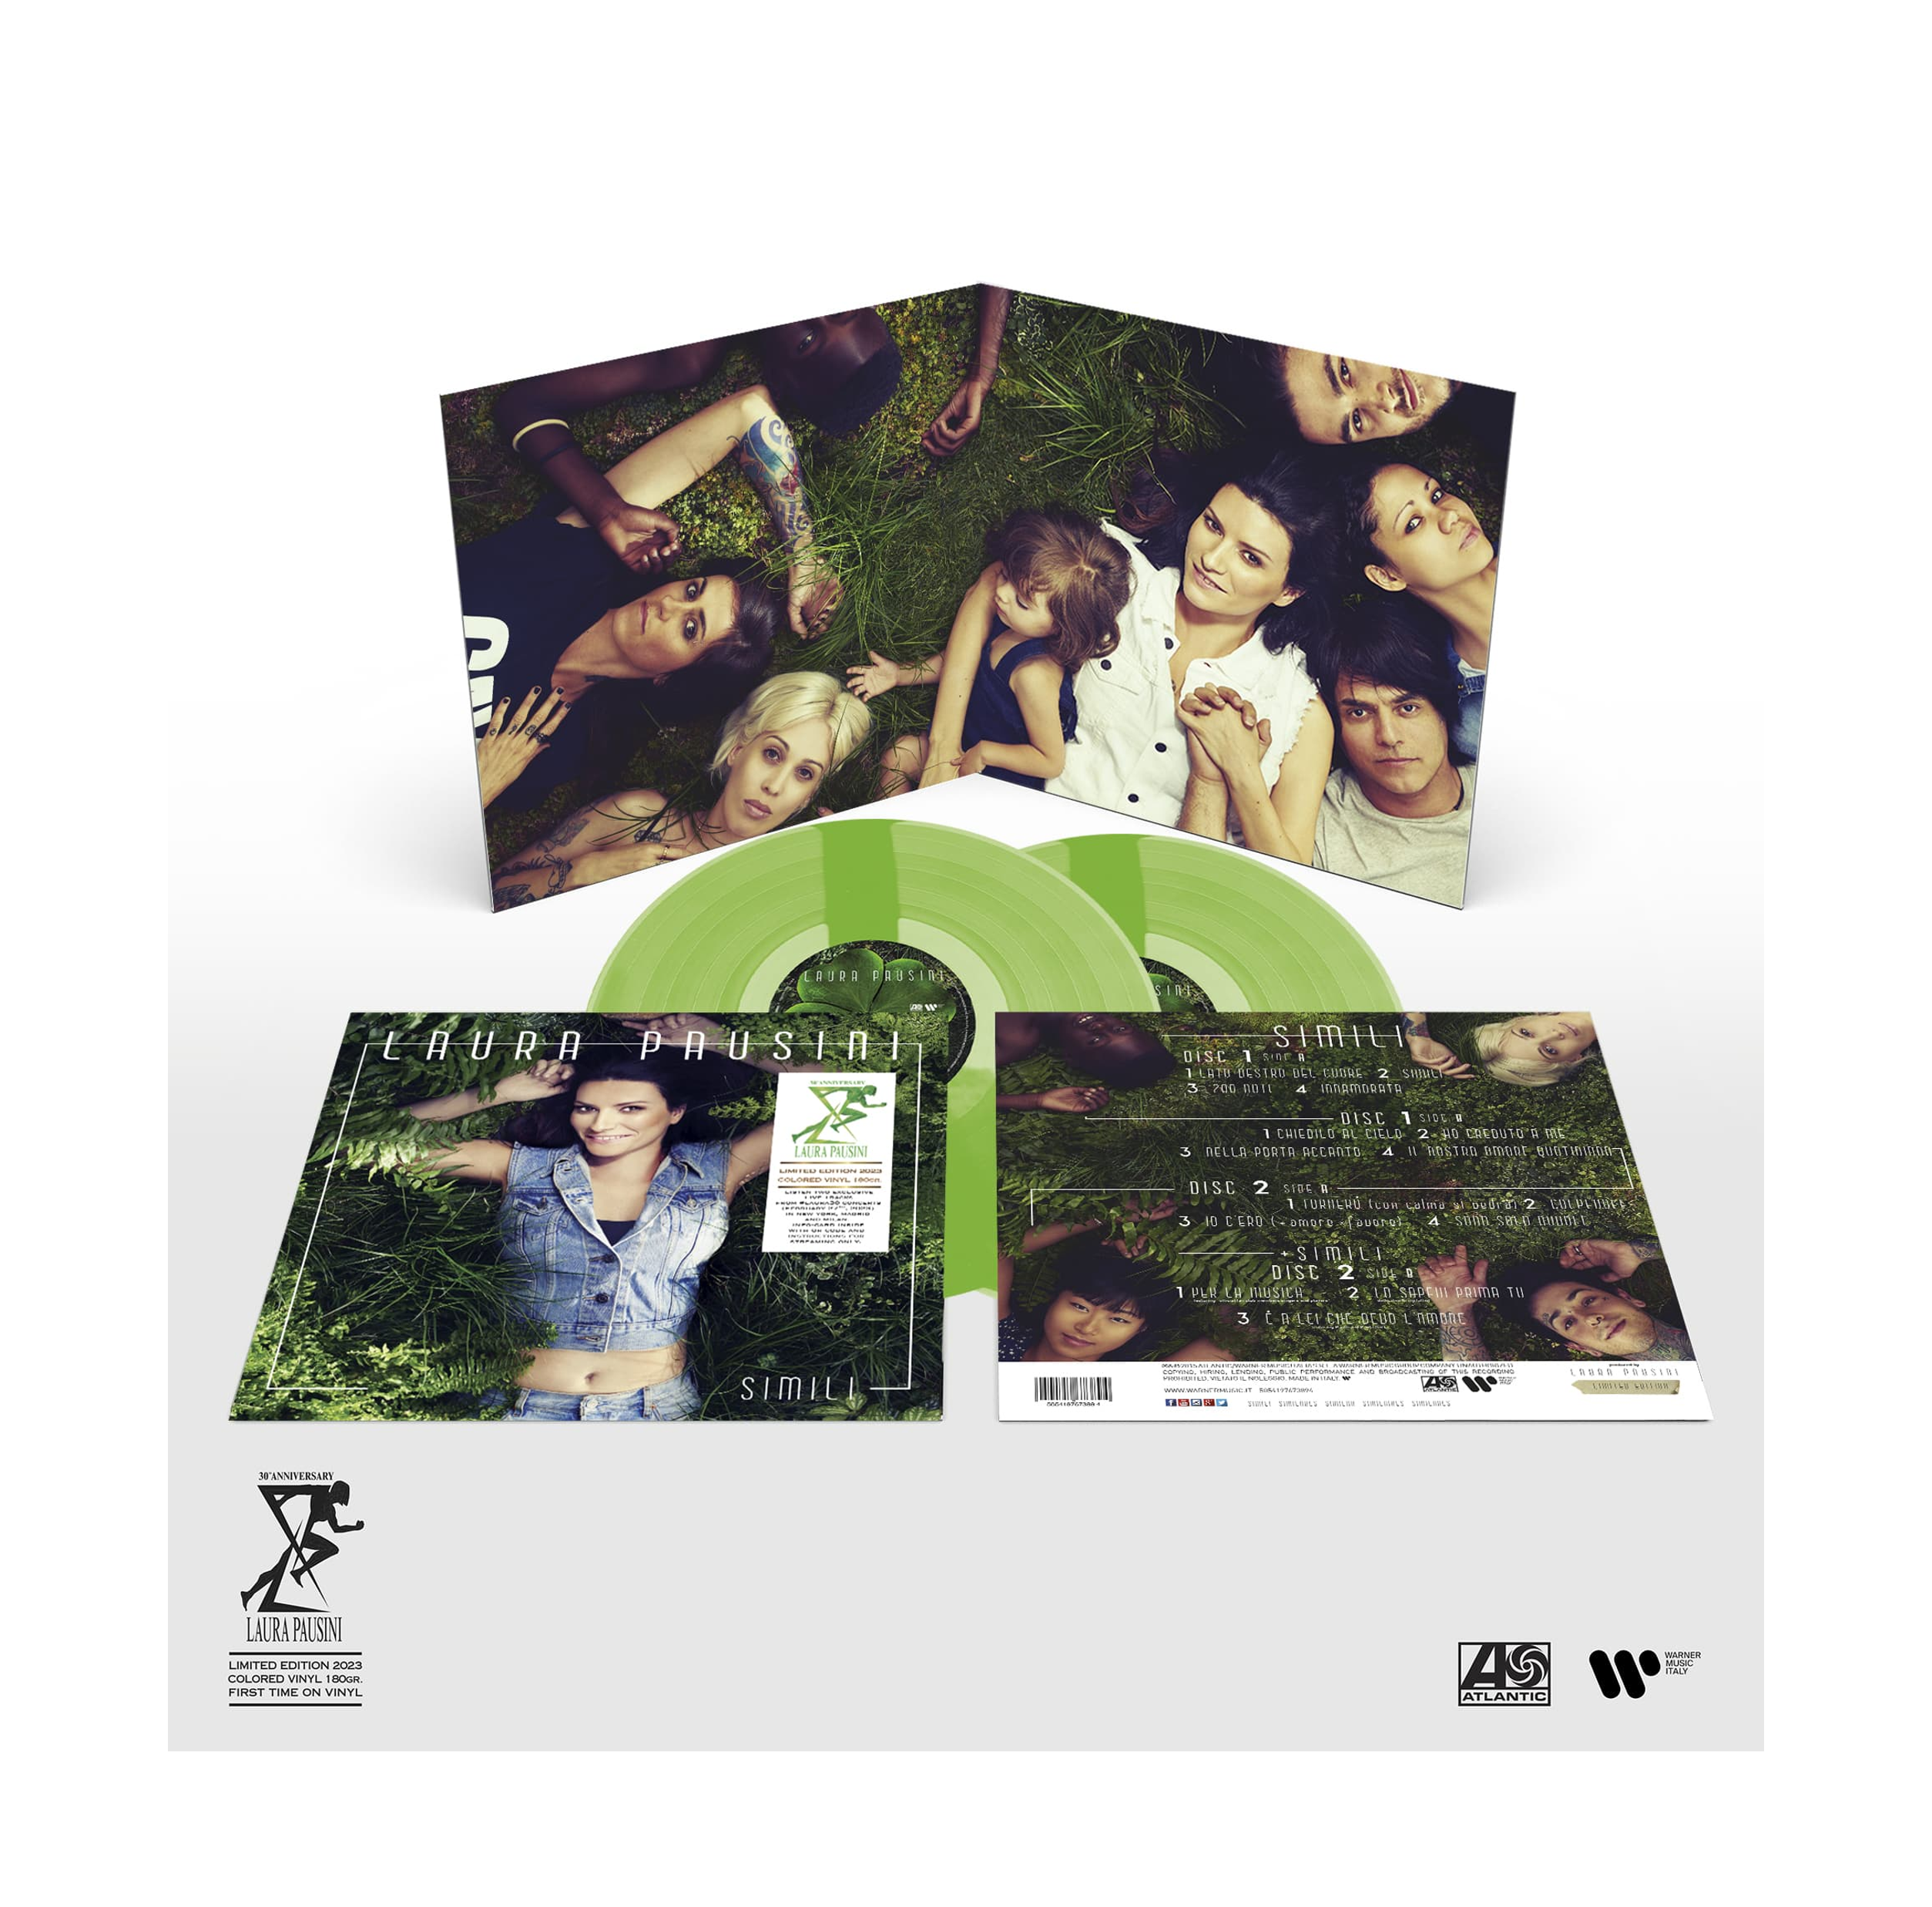 Simili (2LP 180g Trans. Green Vinyl. Limited & Numbered Edition) – Warner  Music Italy Shop